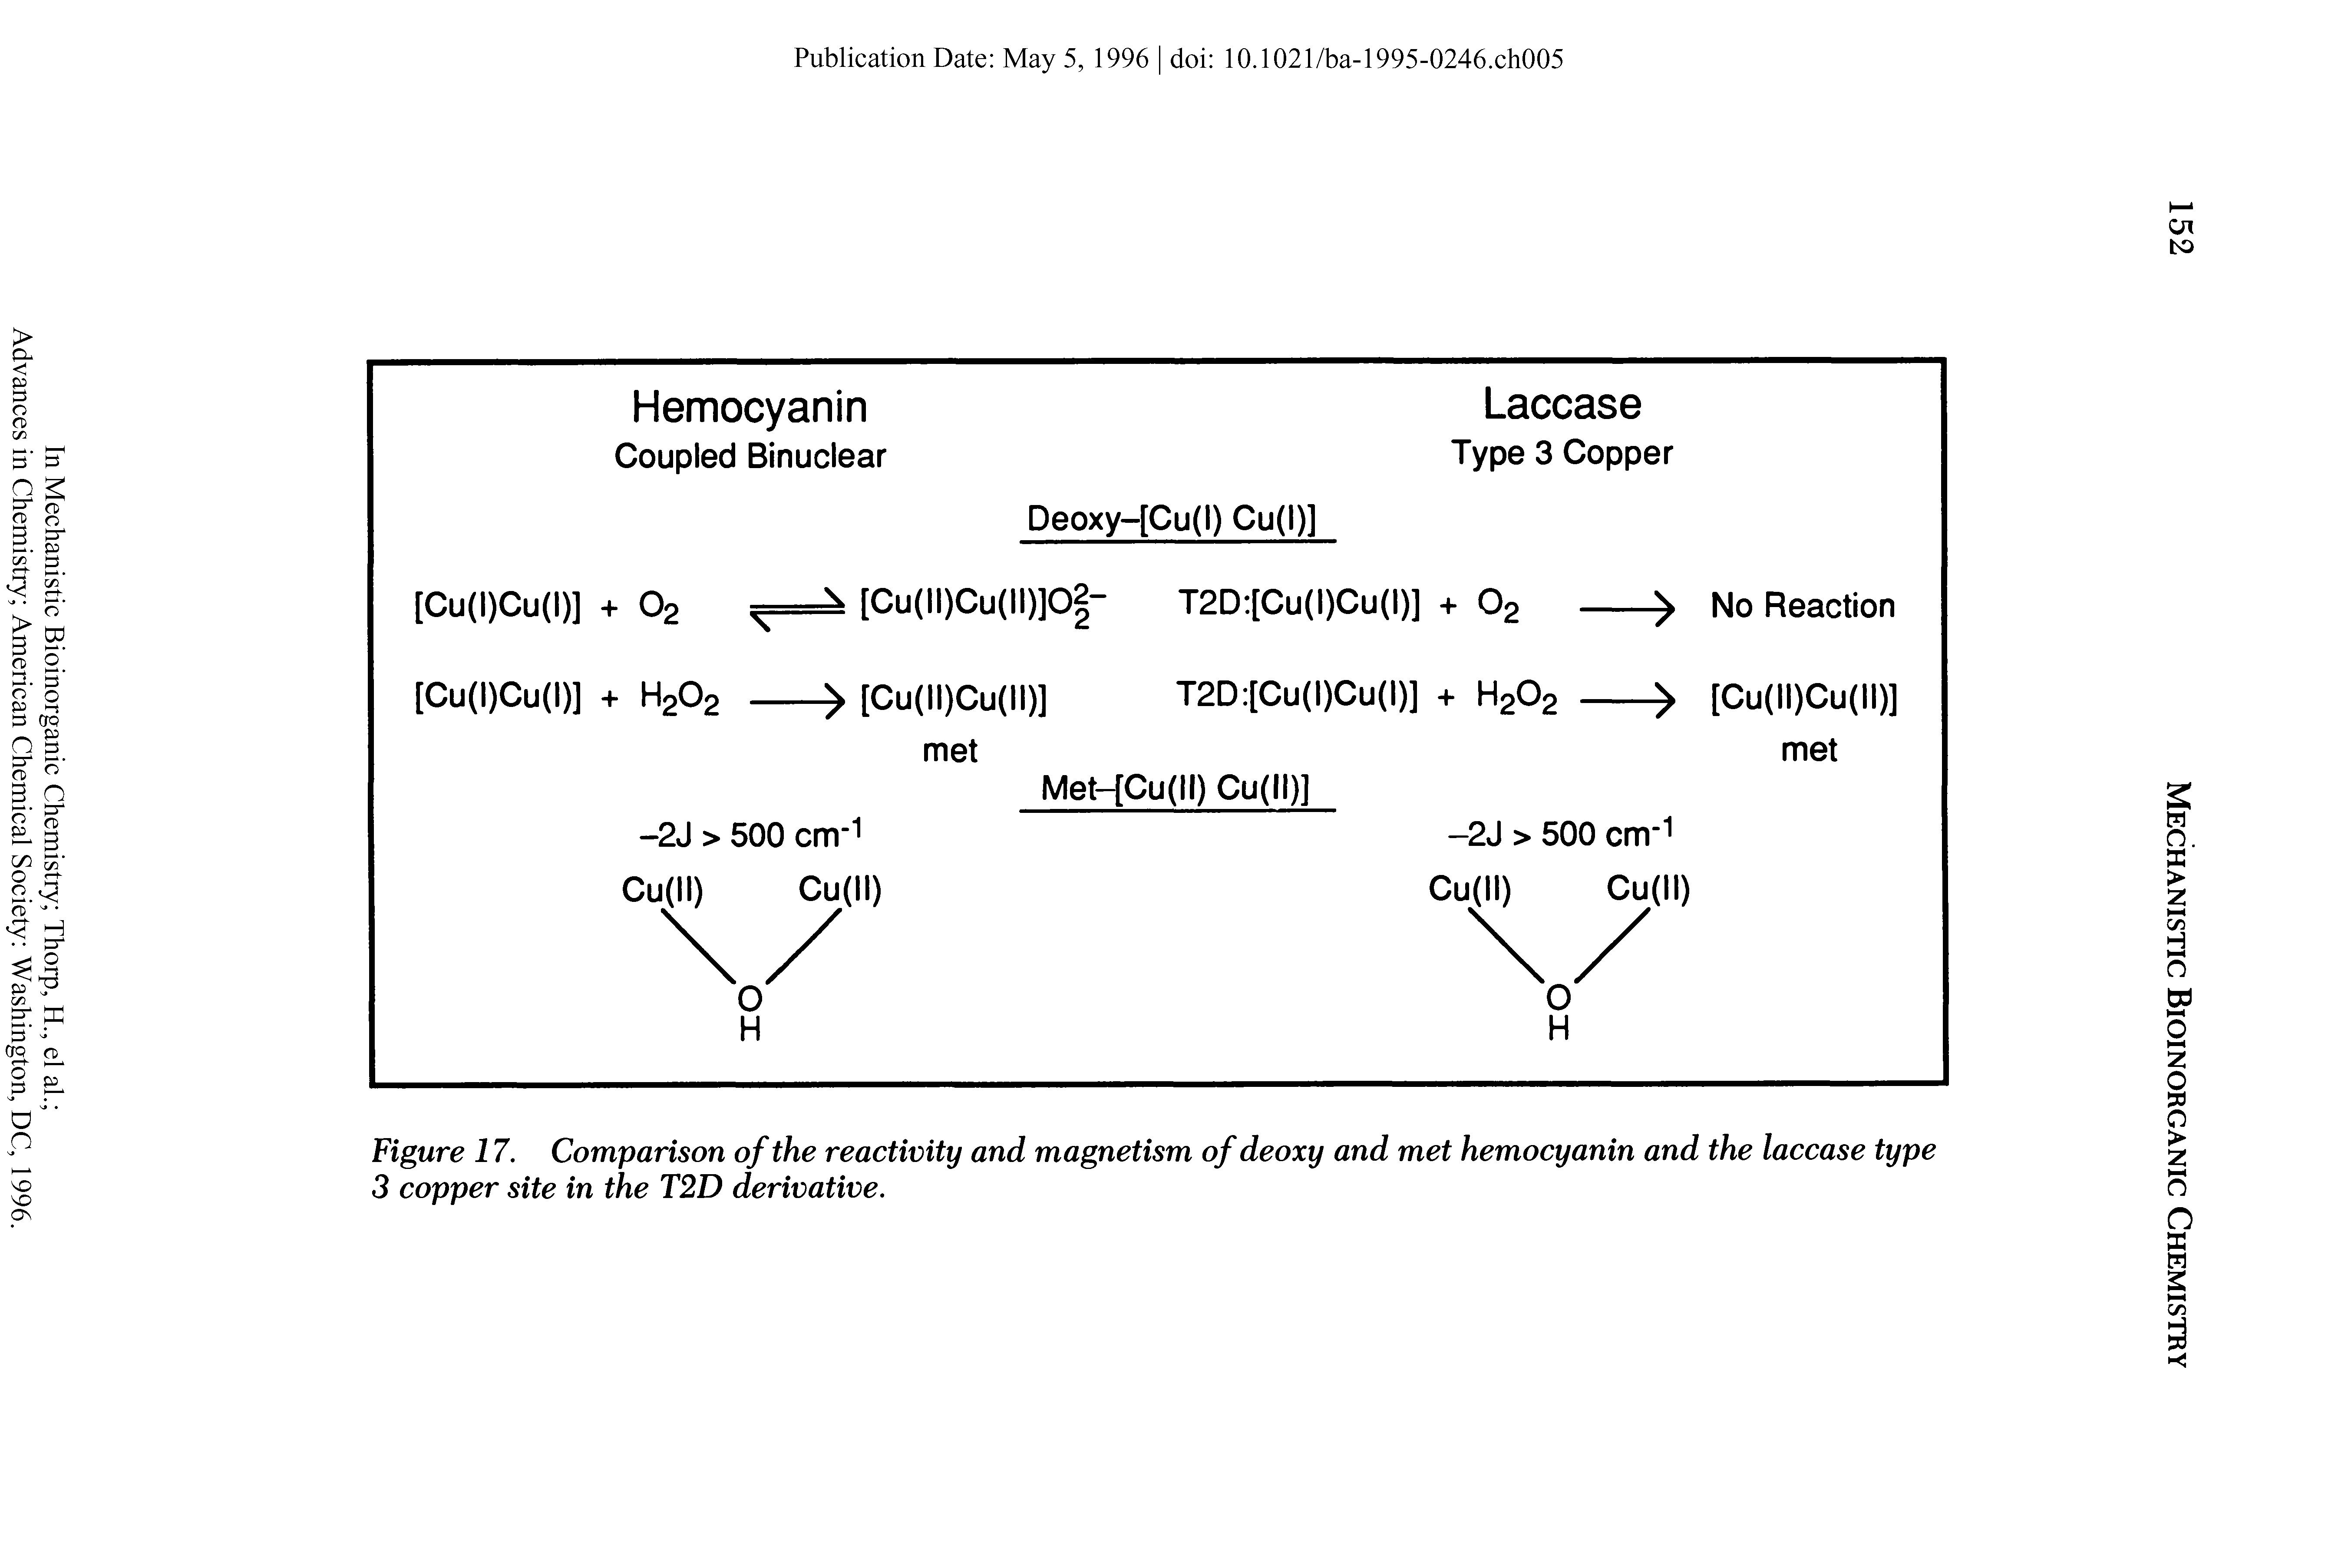 Figure 17. Comparison of the reactivity and magnetism ofdeoxy and met hemocyanin and the laccase type 3 copper site in the T2D derivative.